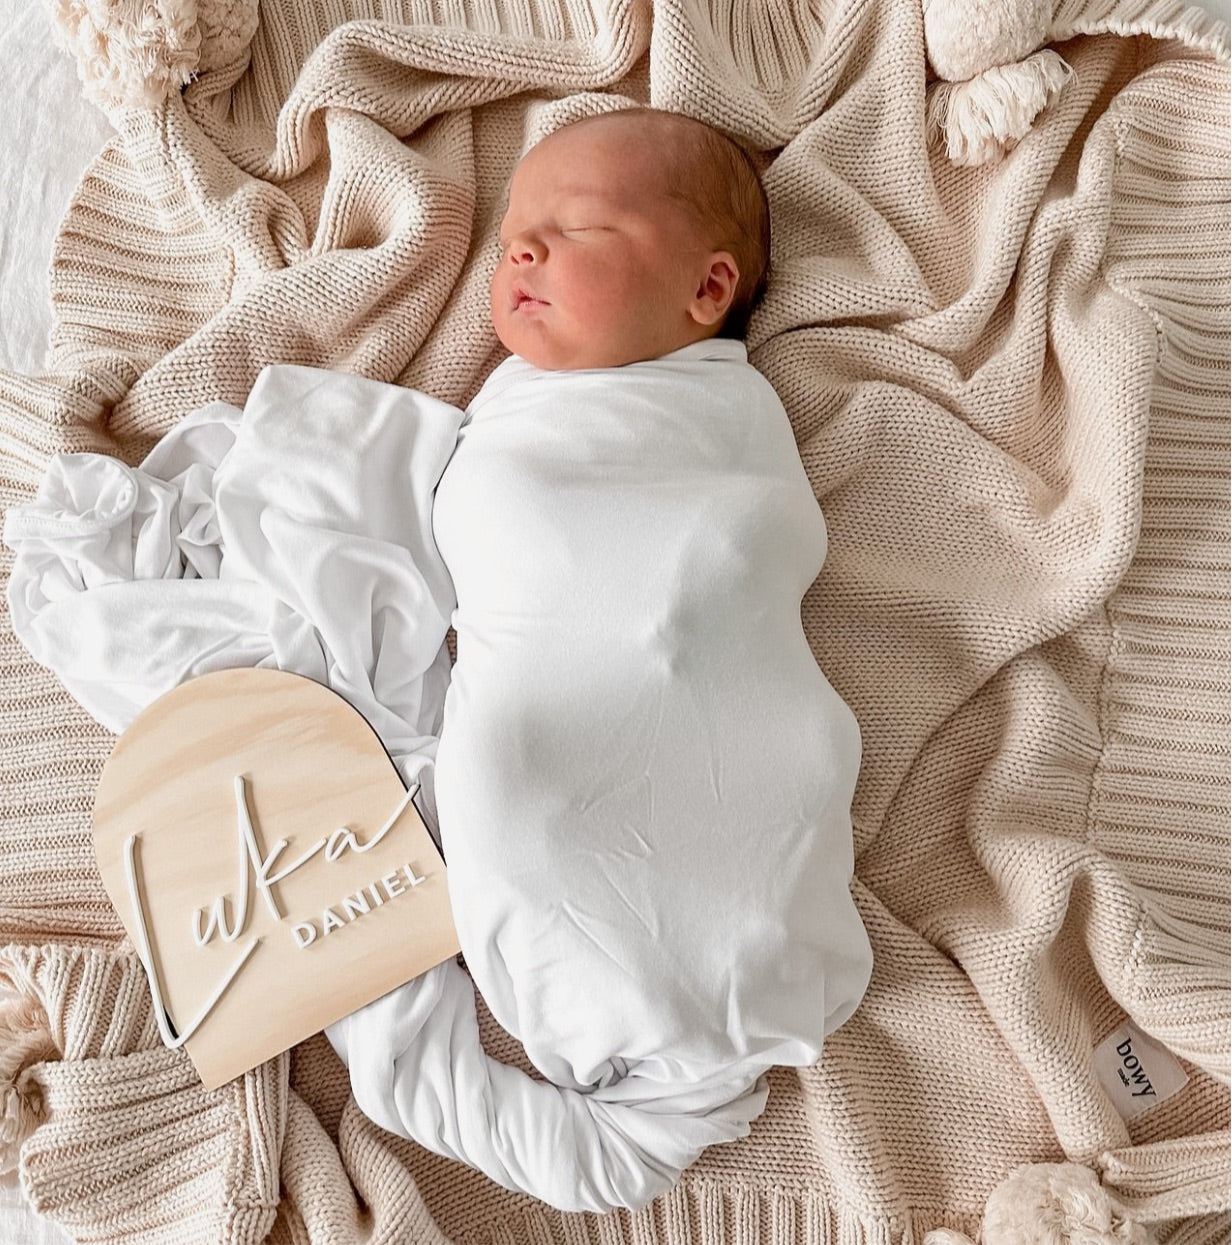 Newborn photography capturing precious moments of a baby's first days with wooden name plaque